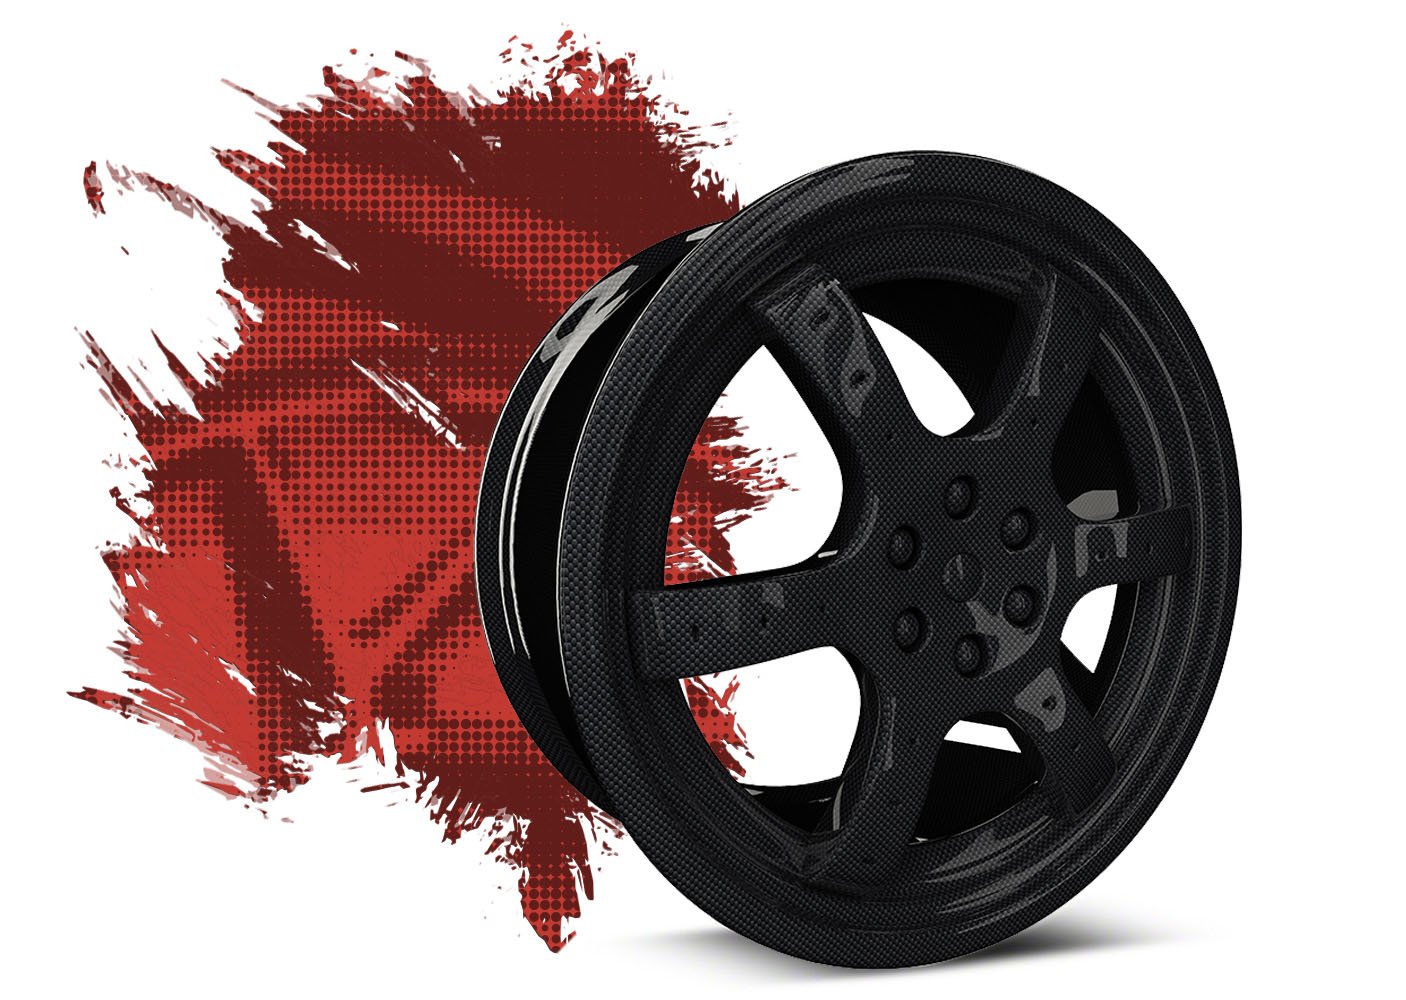 Product image representing the third most popular type of wheel a carbon fiber wheel